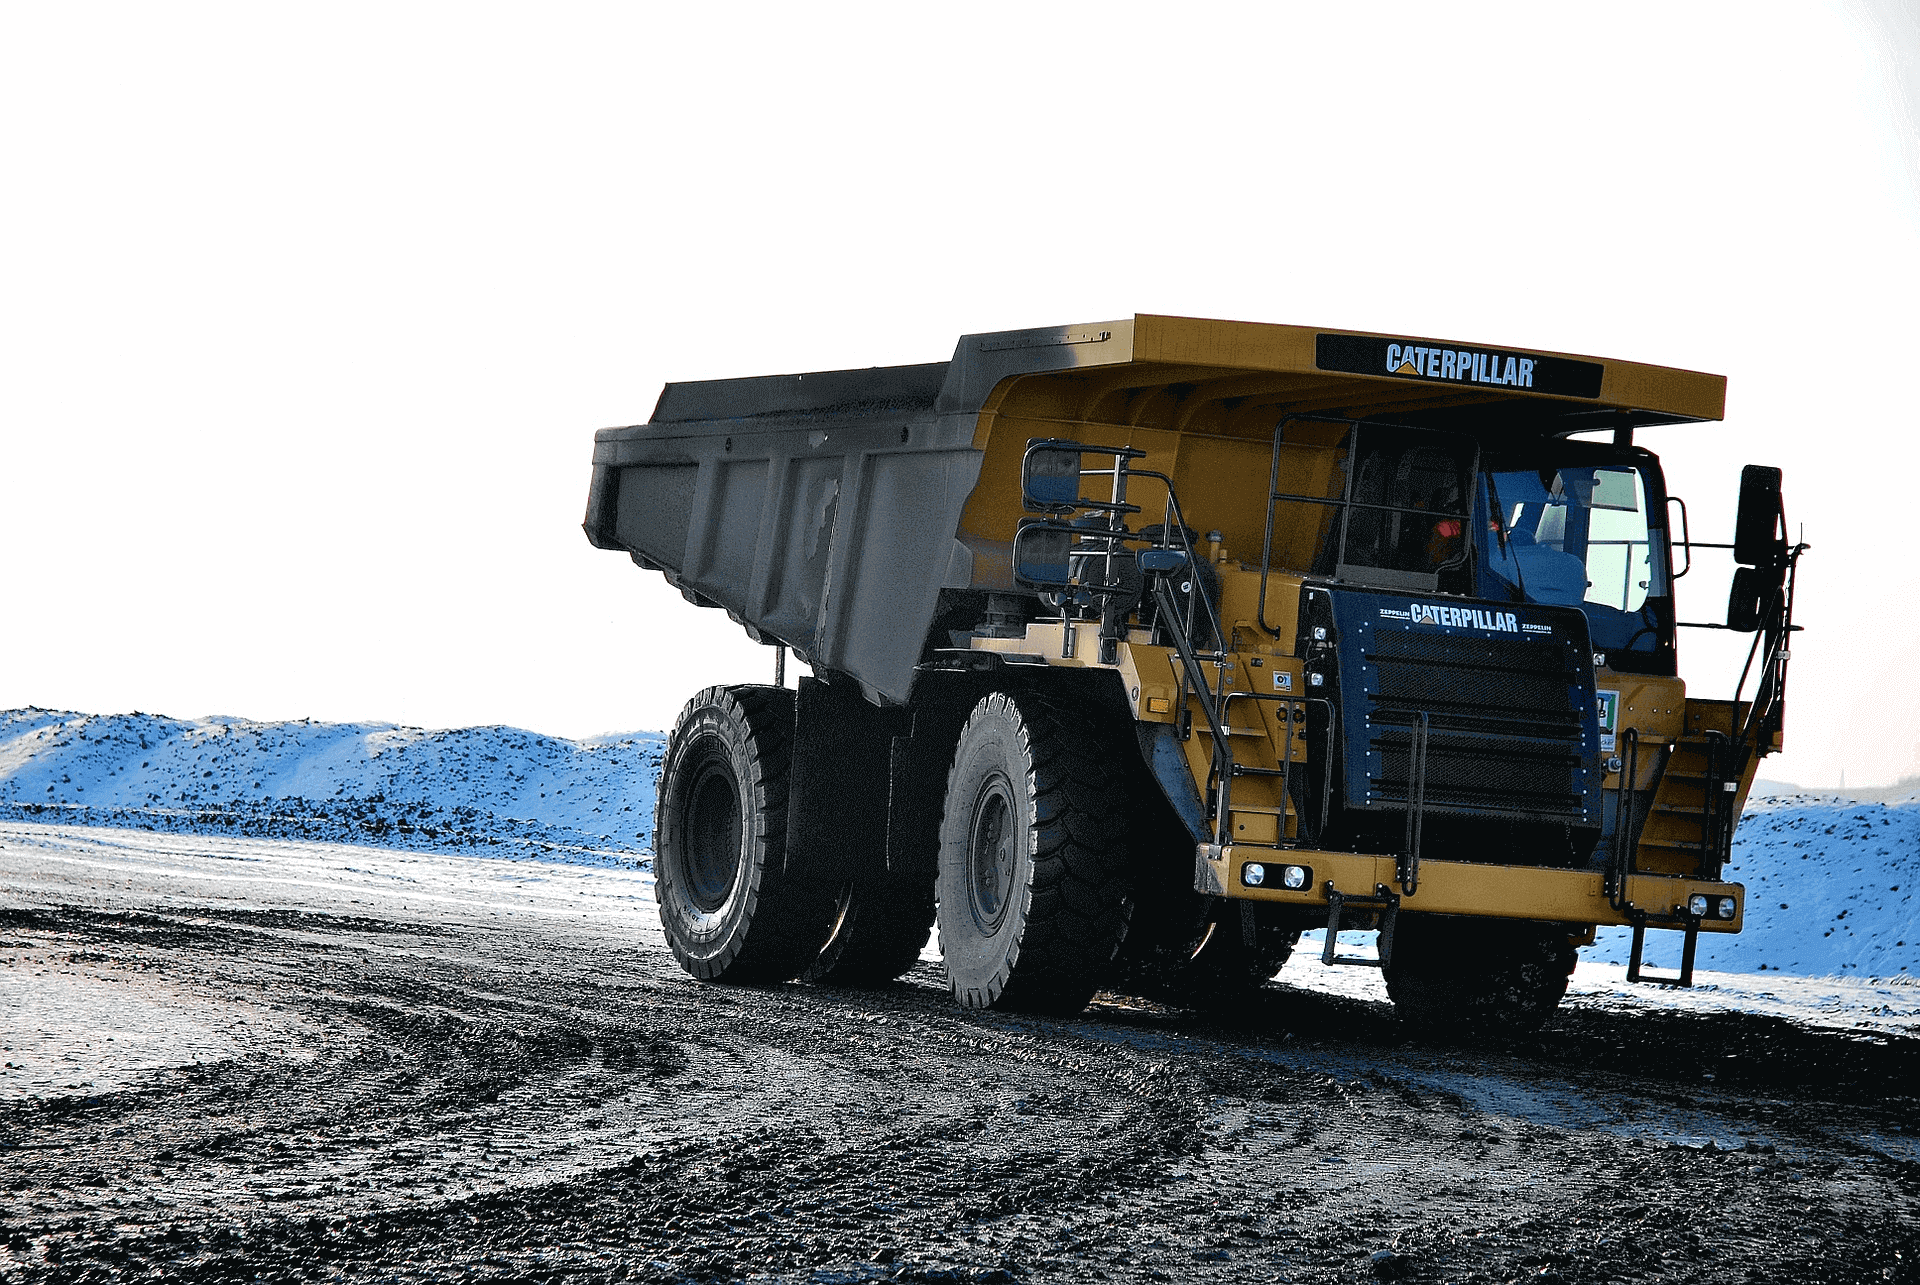 To&nbsp;learn more about autonomous solutions for the Mining Industry, download the brochure